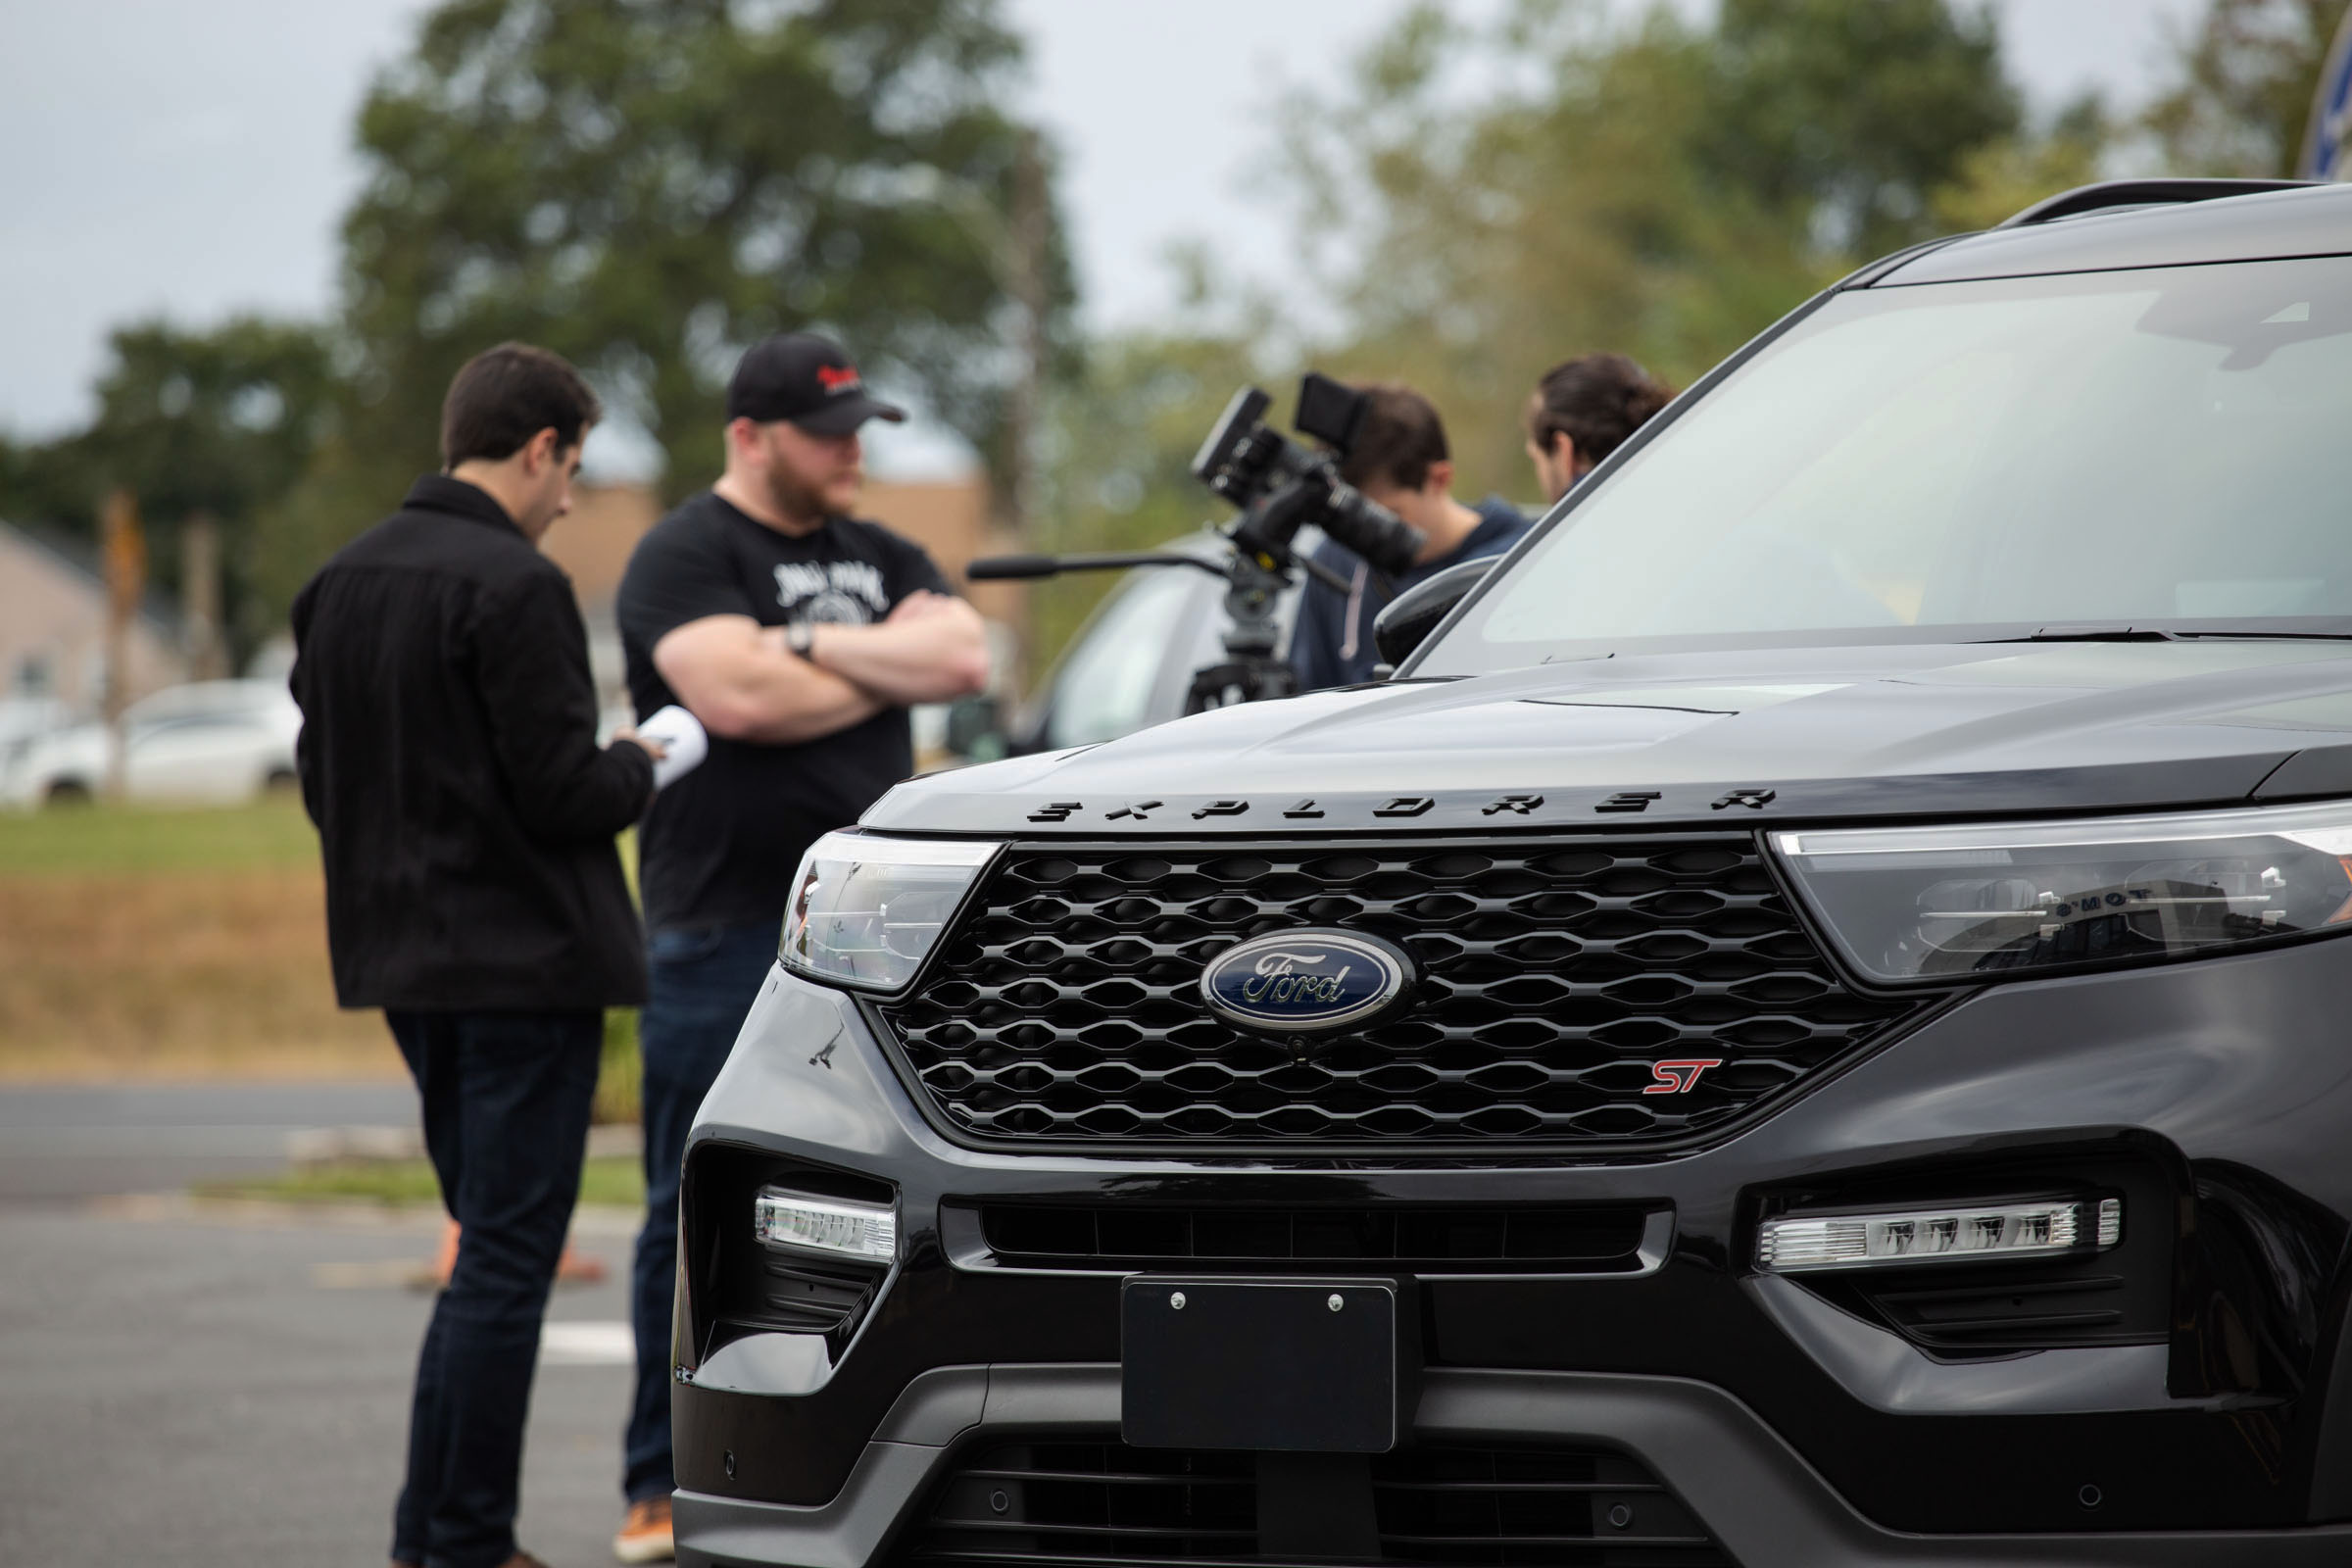 Ford Explorer with video production crew in background.